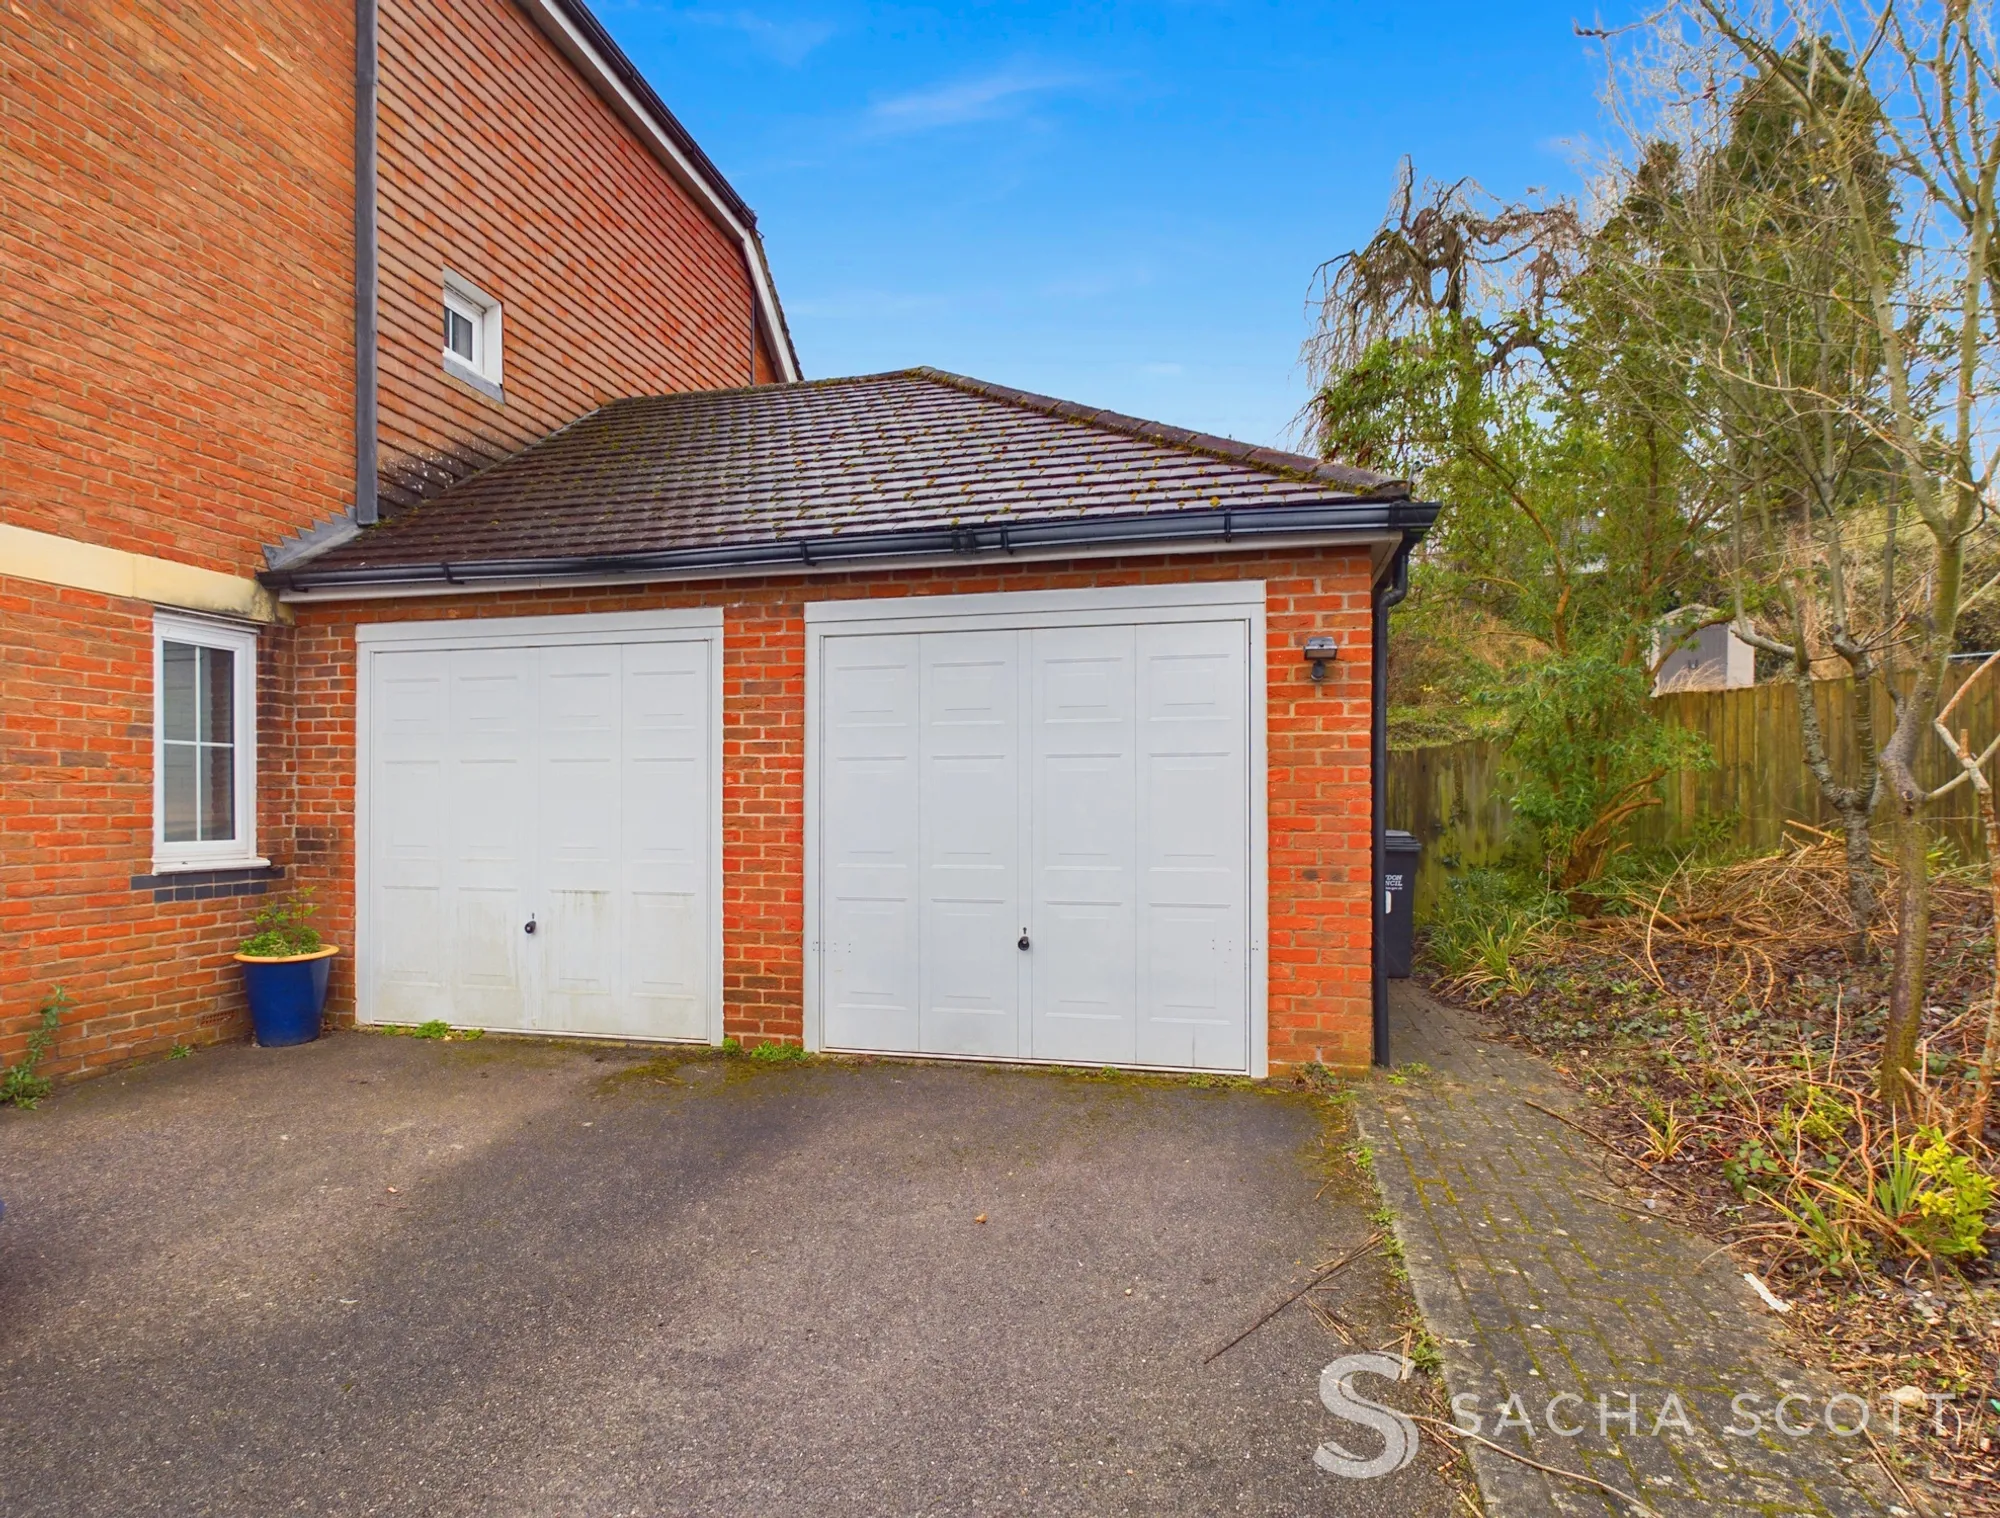 4 bed mid-terraced house for sale in Woodfield Close, Coulsdon  - Property Image 36